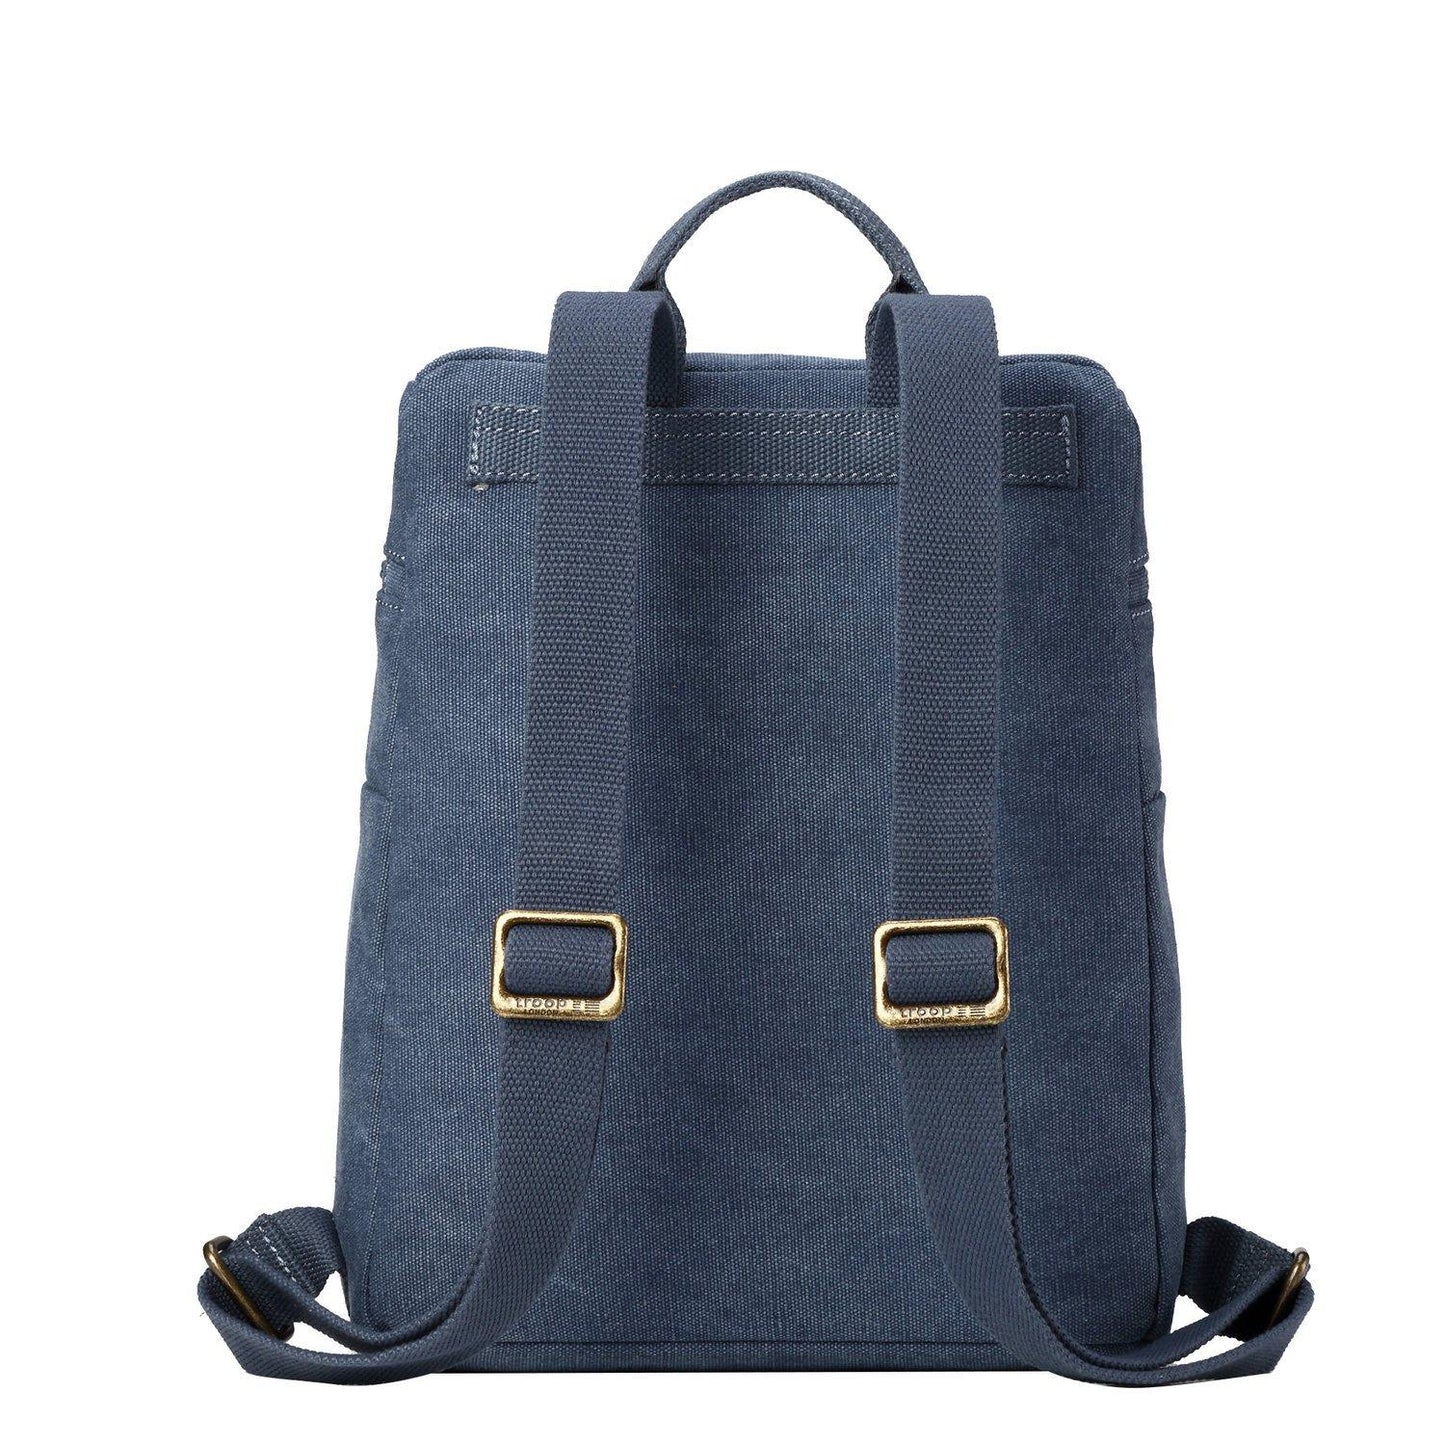 Troop London Classic Small Canvas Backpack